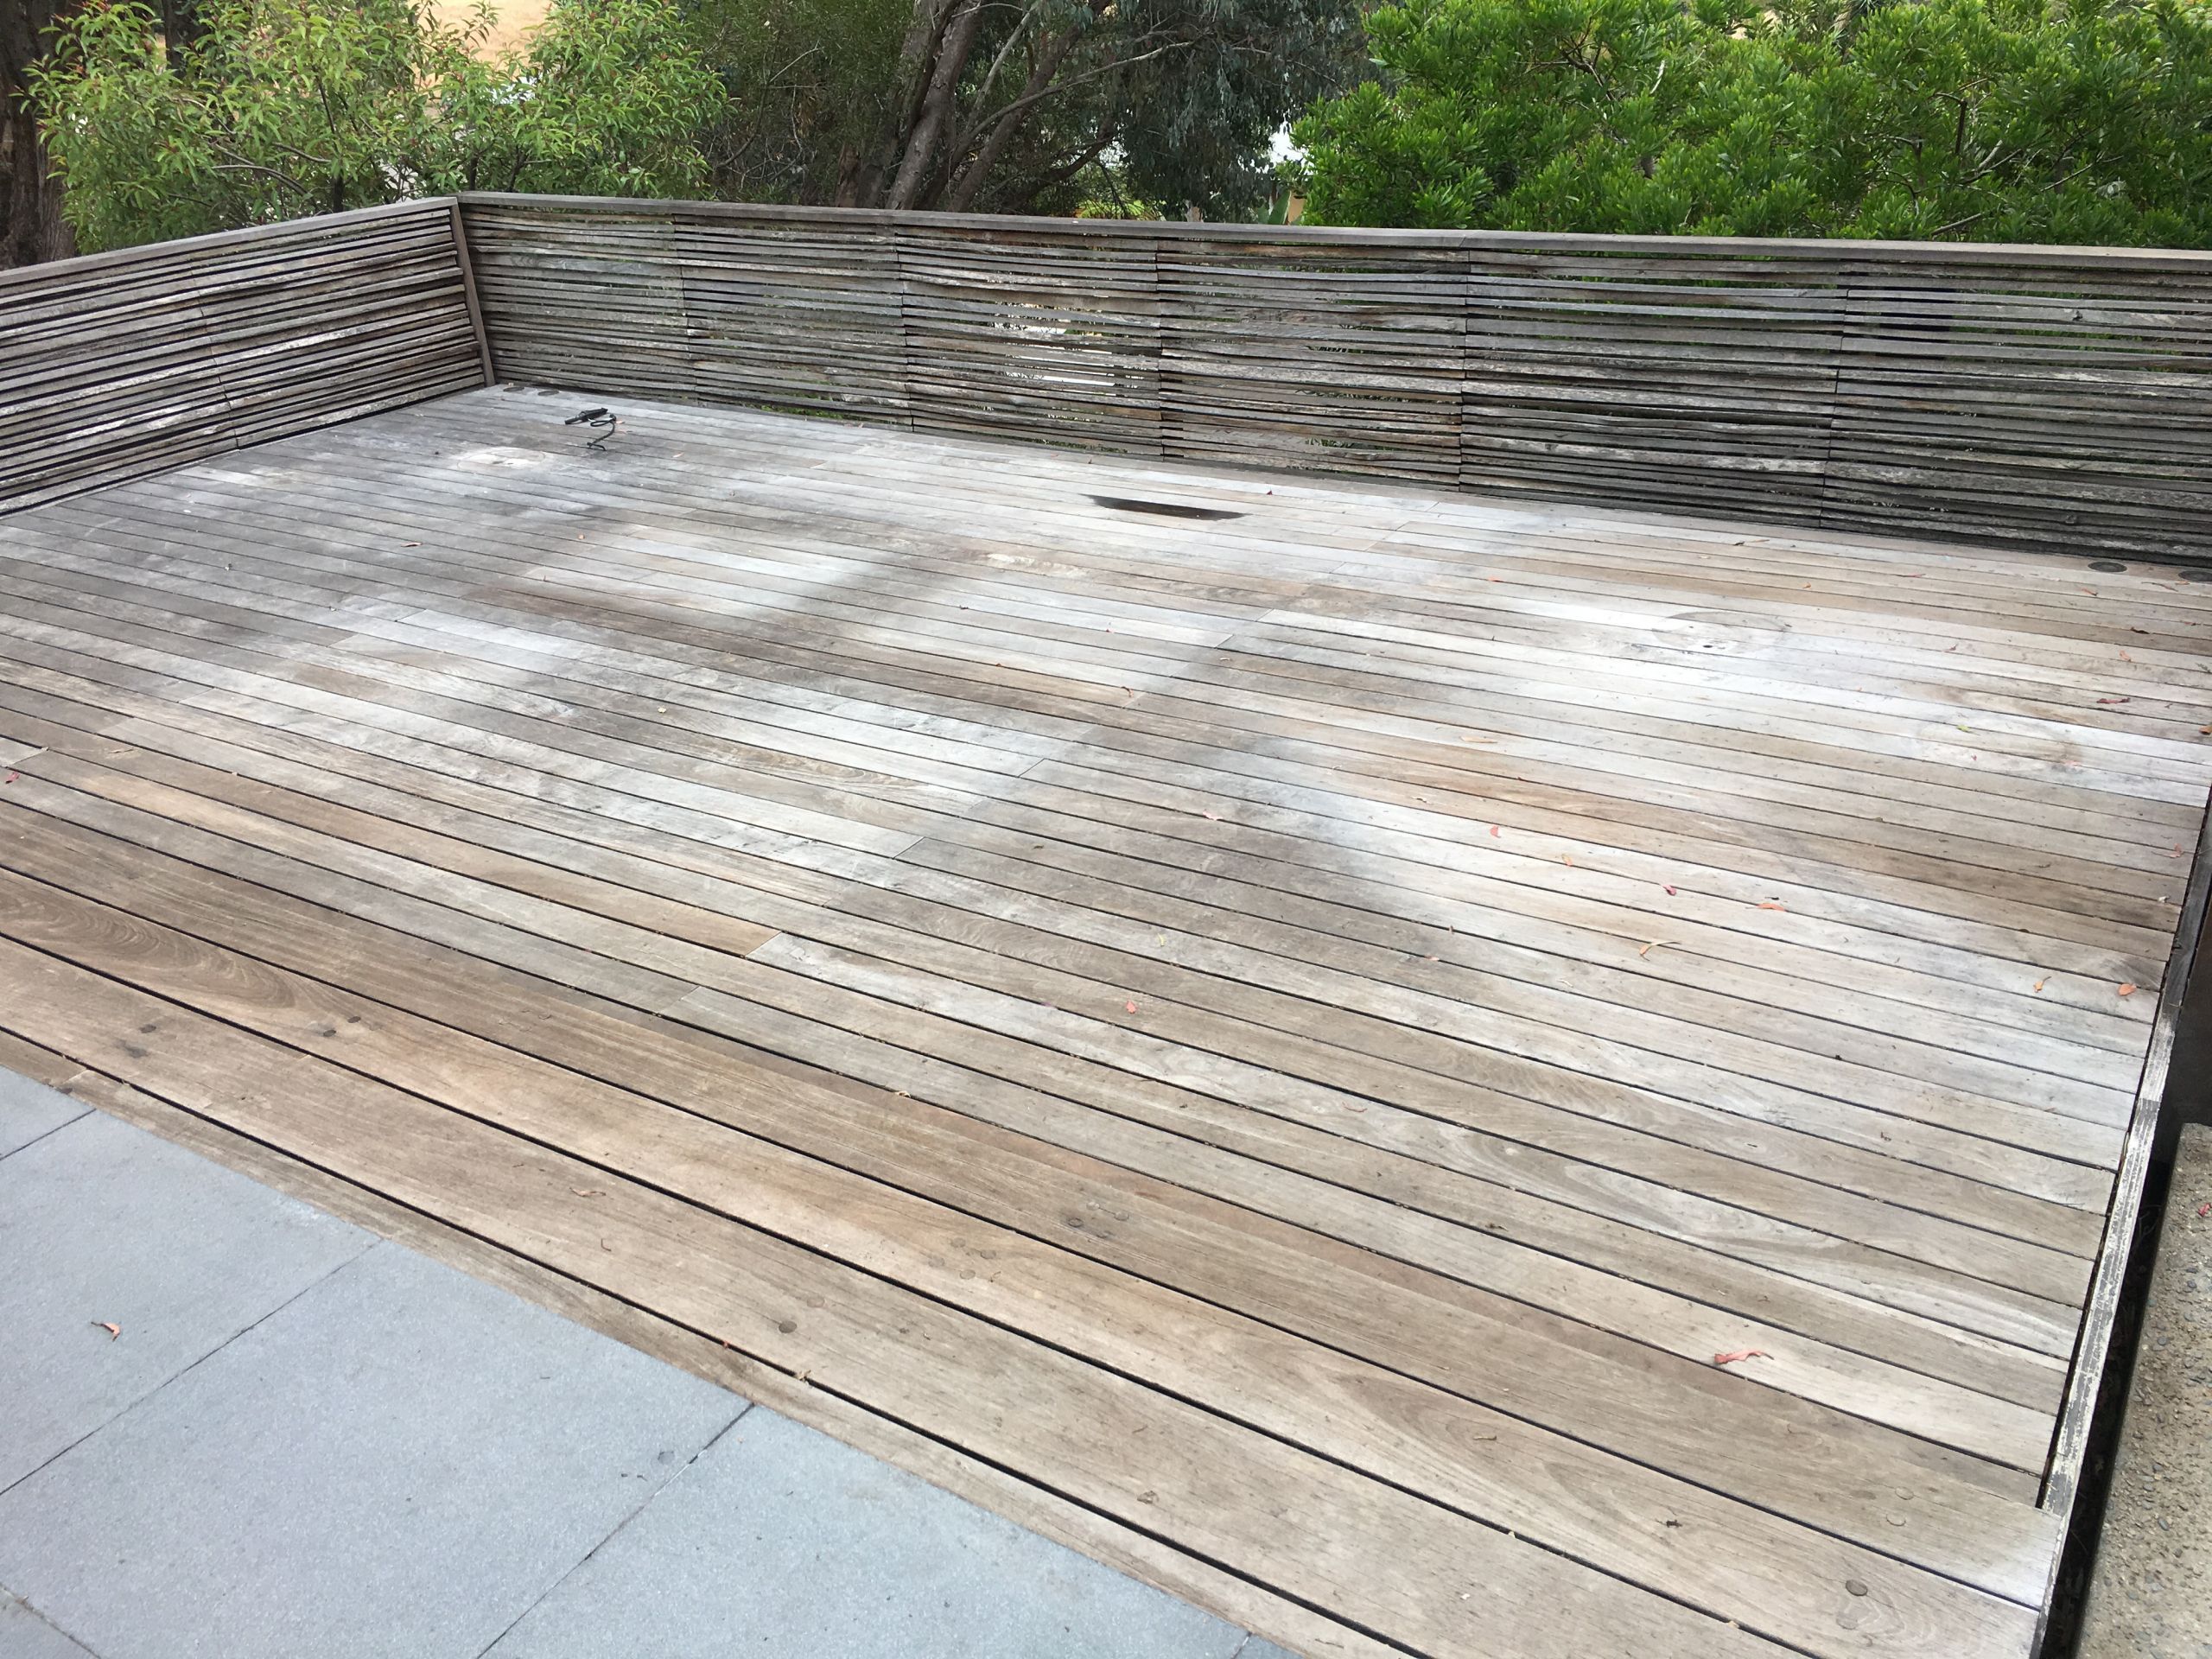 Best Deck Paint Review
 The 6 Best Deck Stain Reviews and Ratings